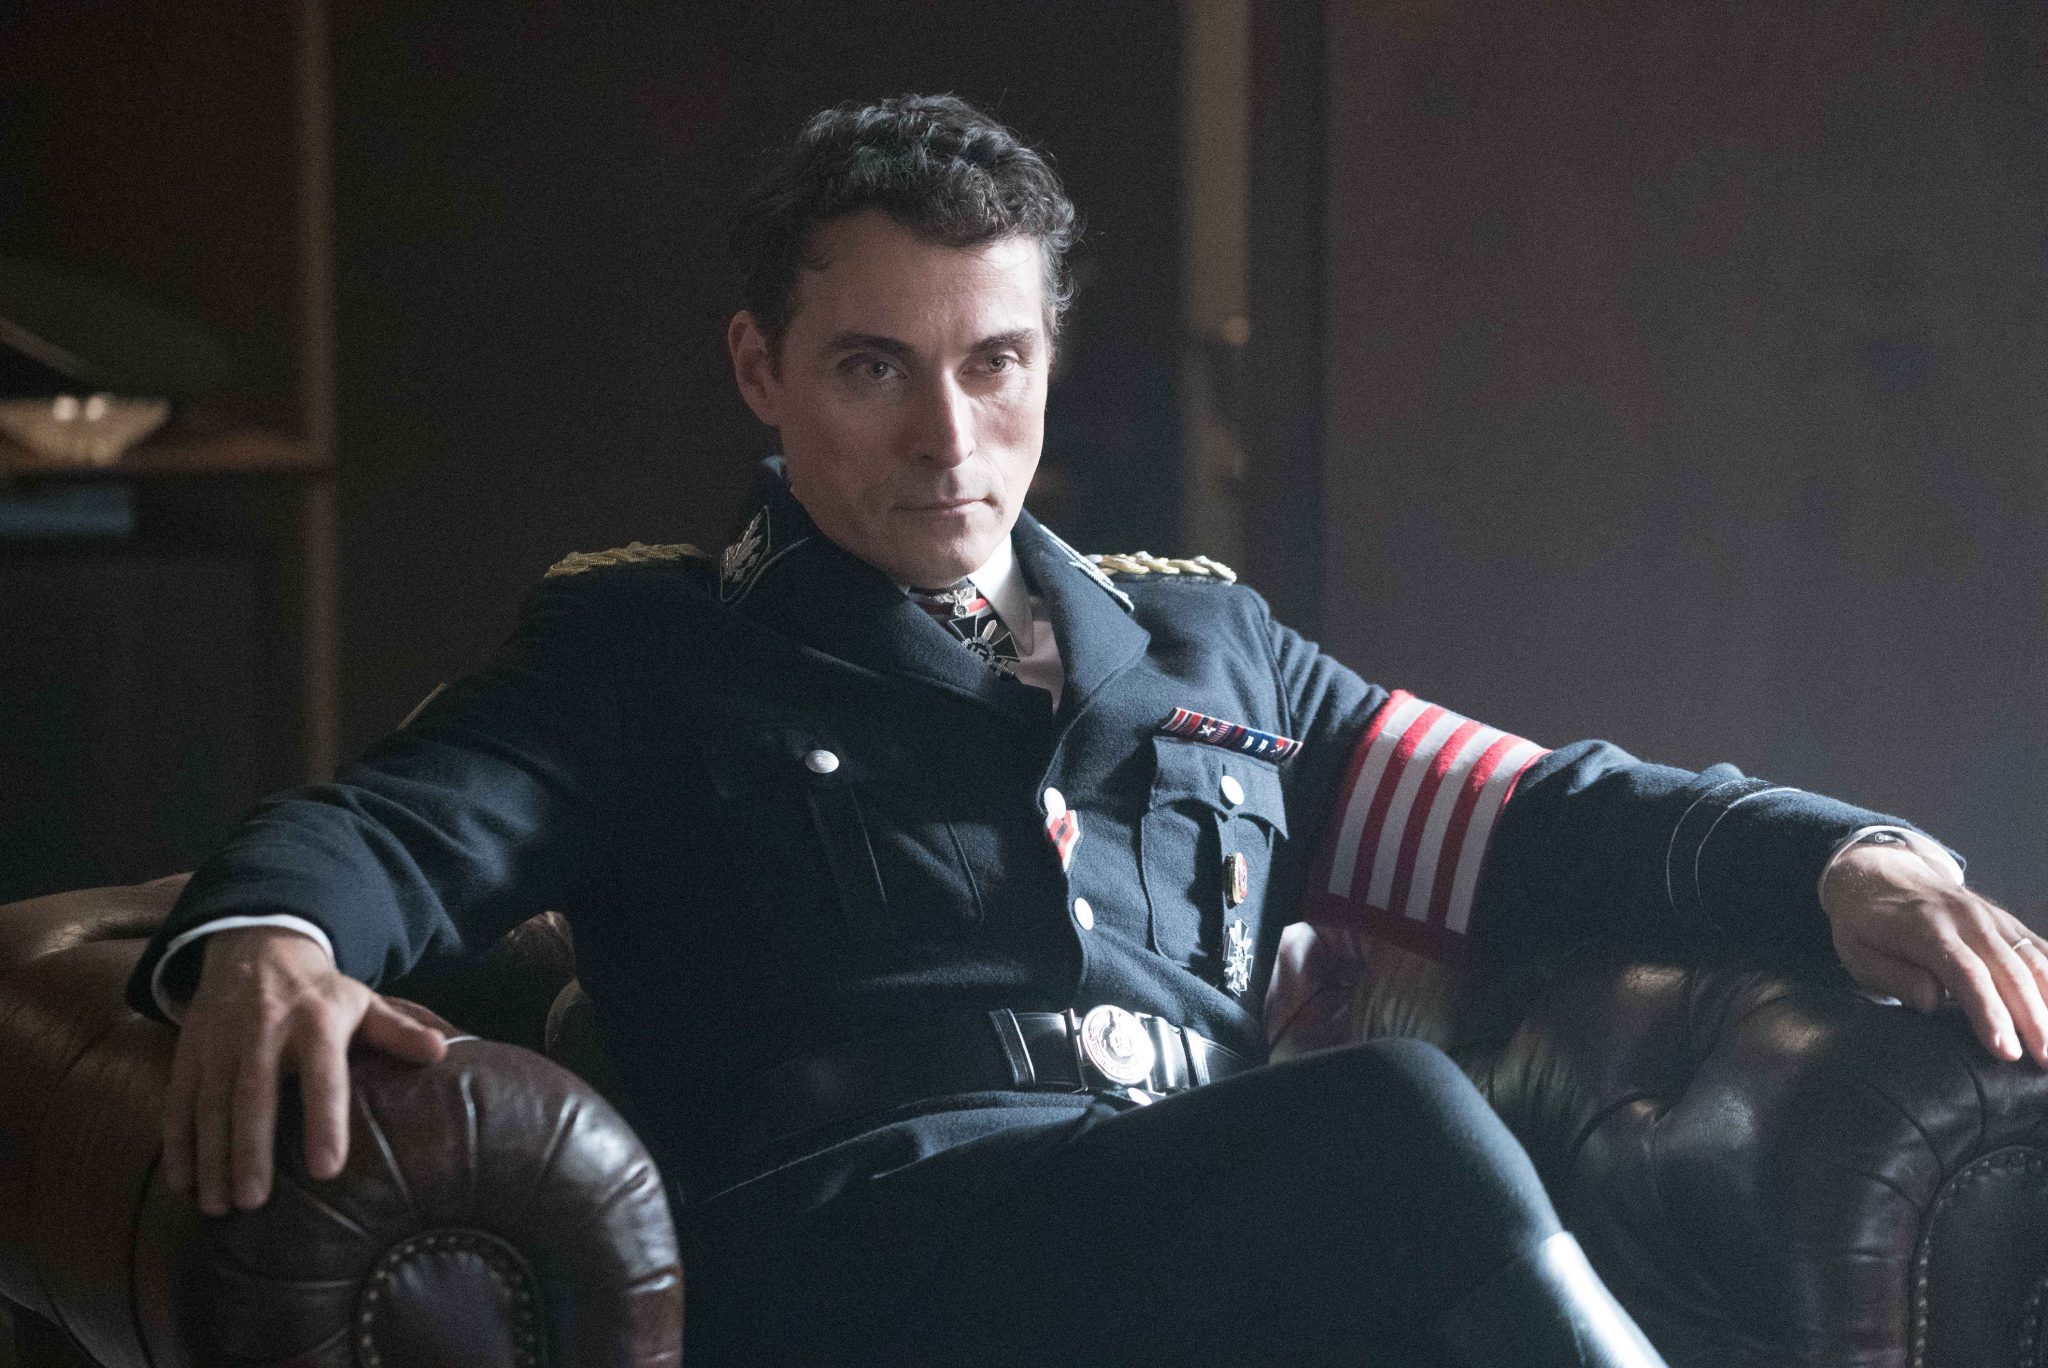 Rufus Sewell as Obergruppenführer John Smith in The Man in the High Castle: Season 2. Photo Credit: Amazon Prime Video/Liane Hentscher